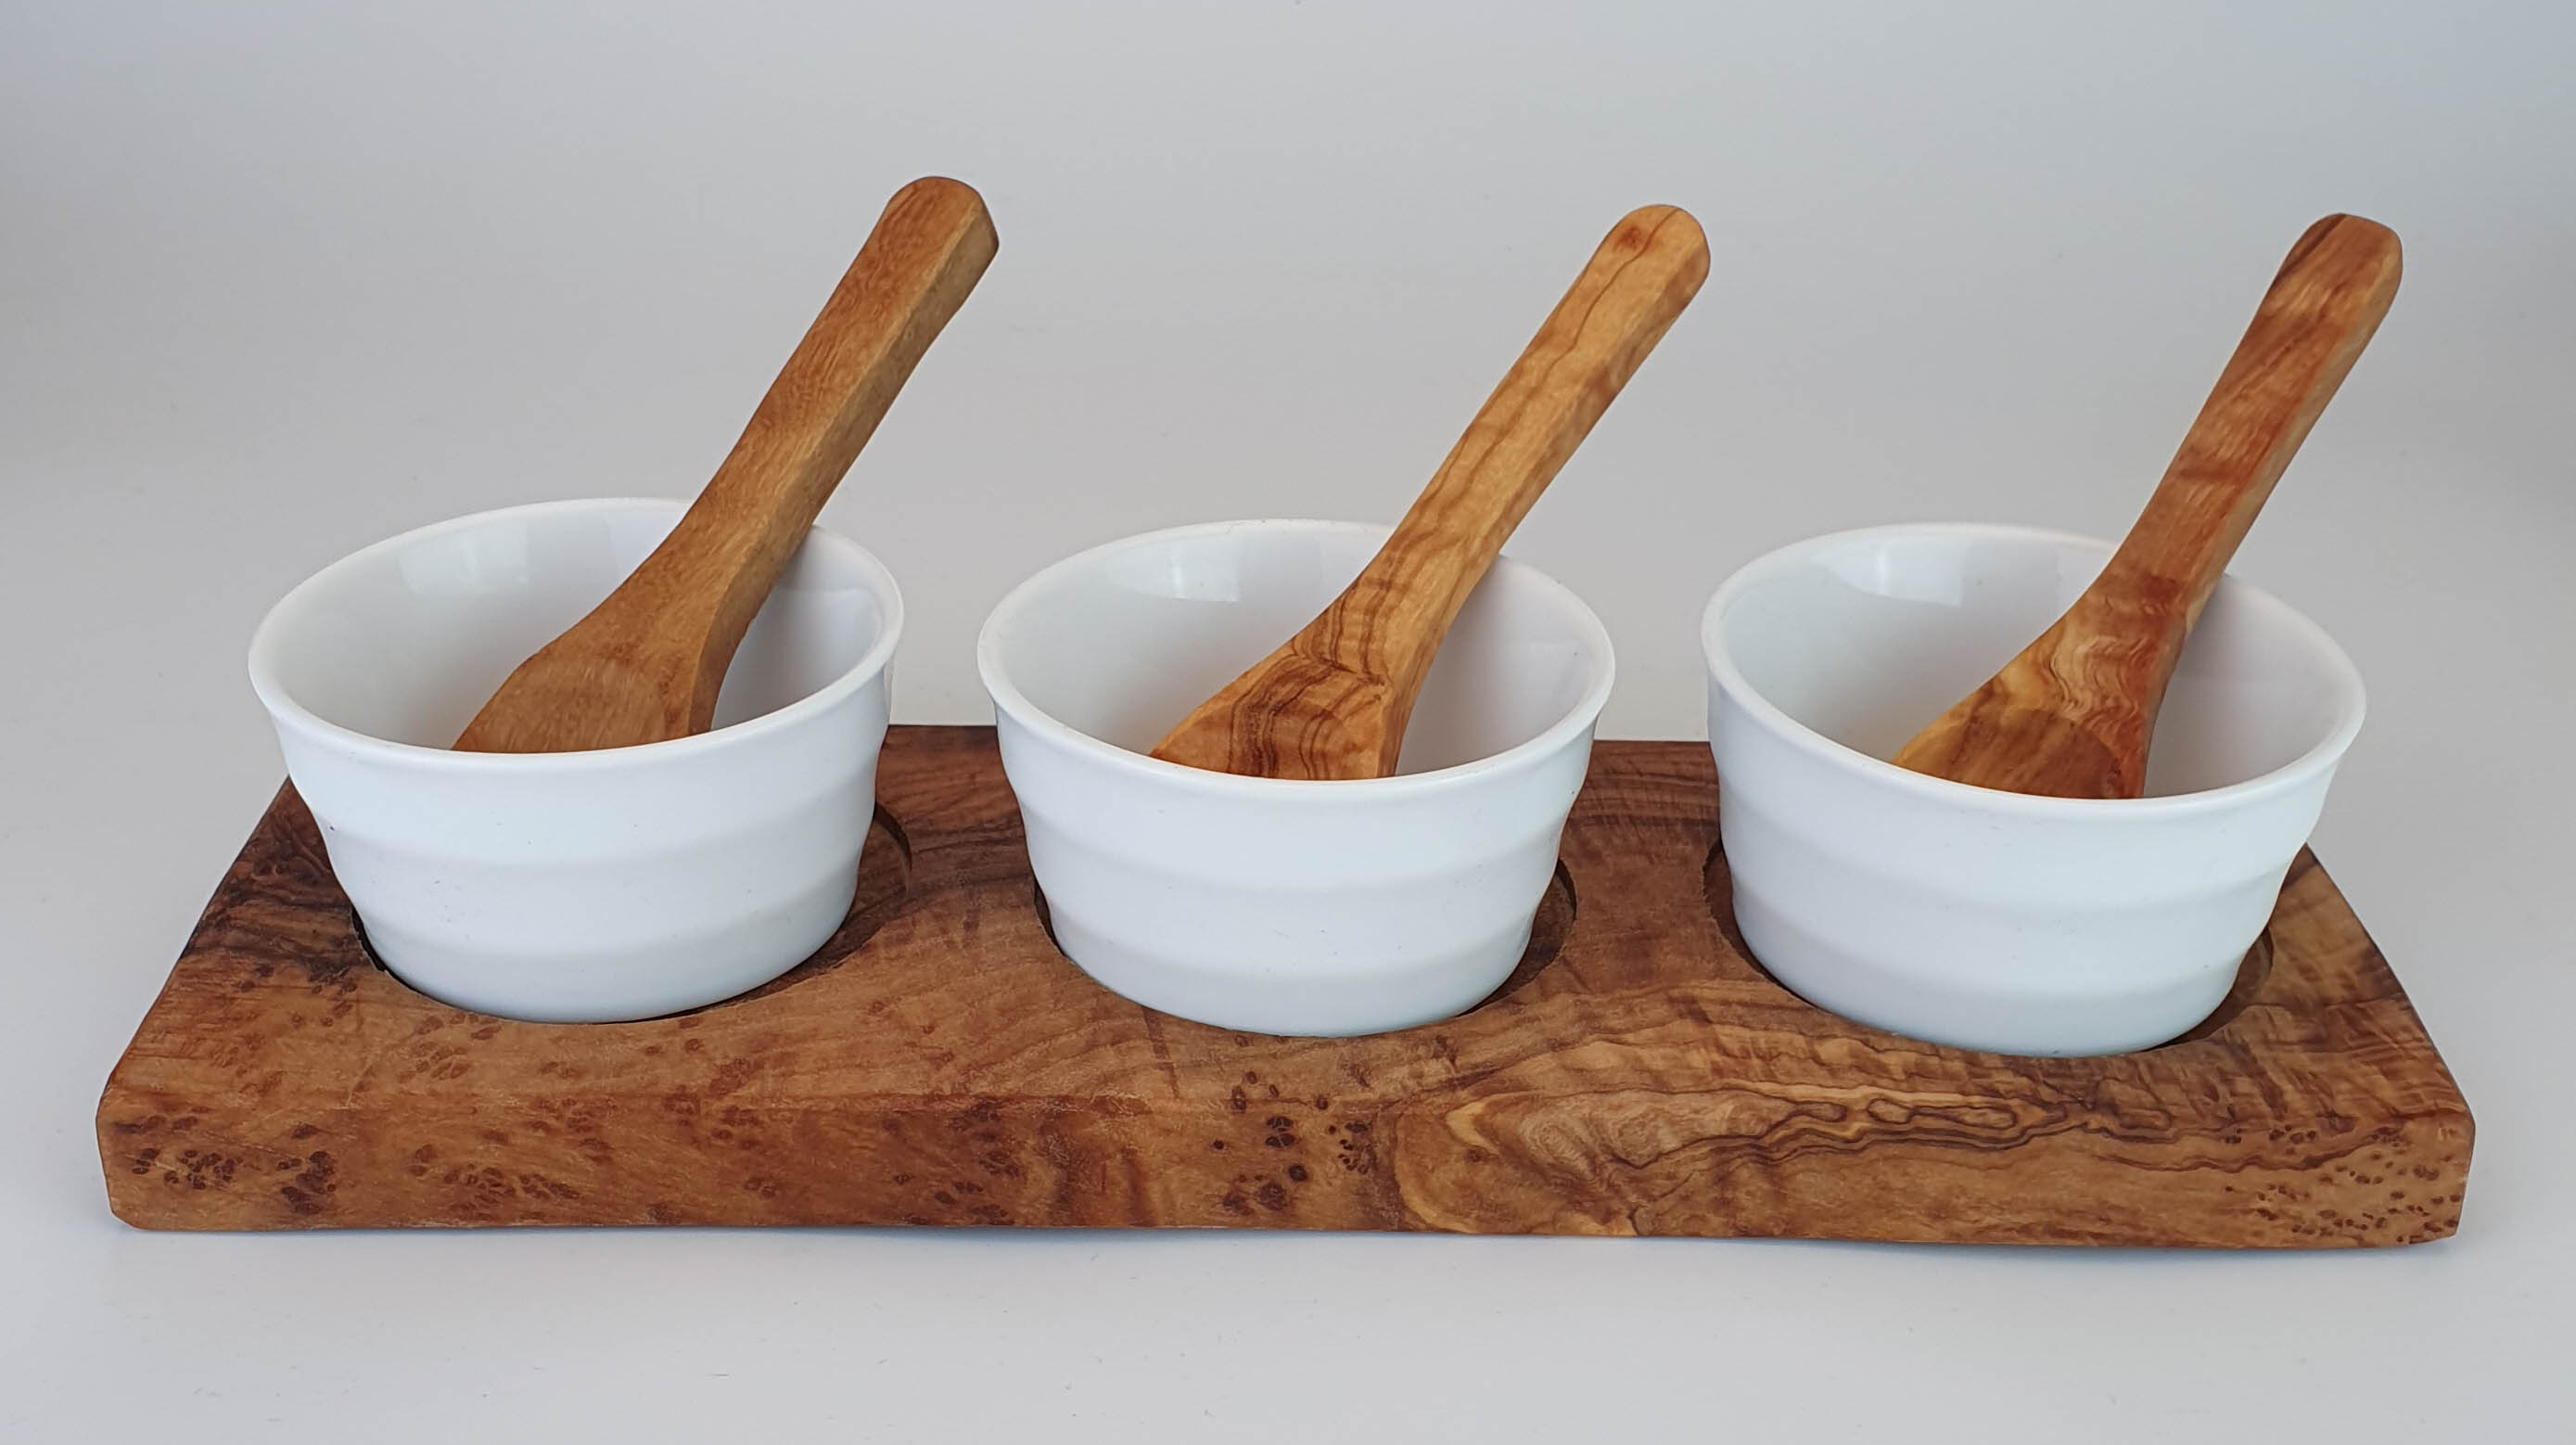 3-piece Dip Set 2022 with Olive Wood and Small Porcelain Bowls